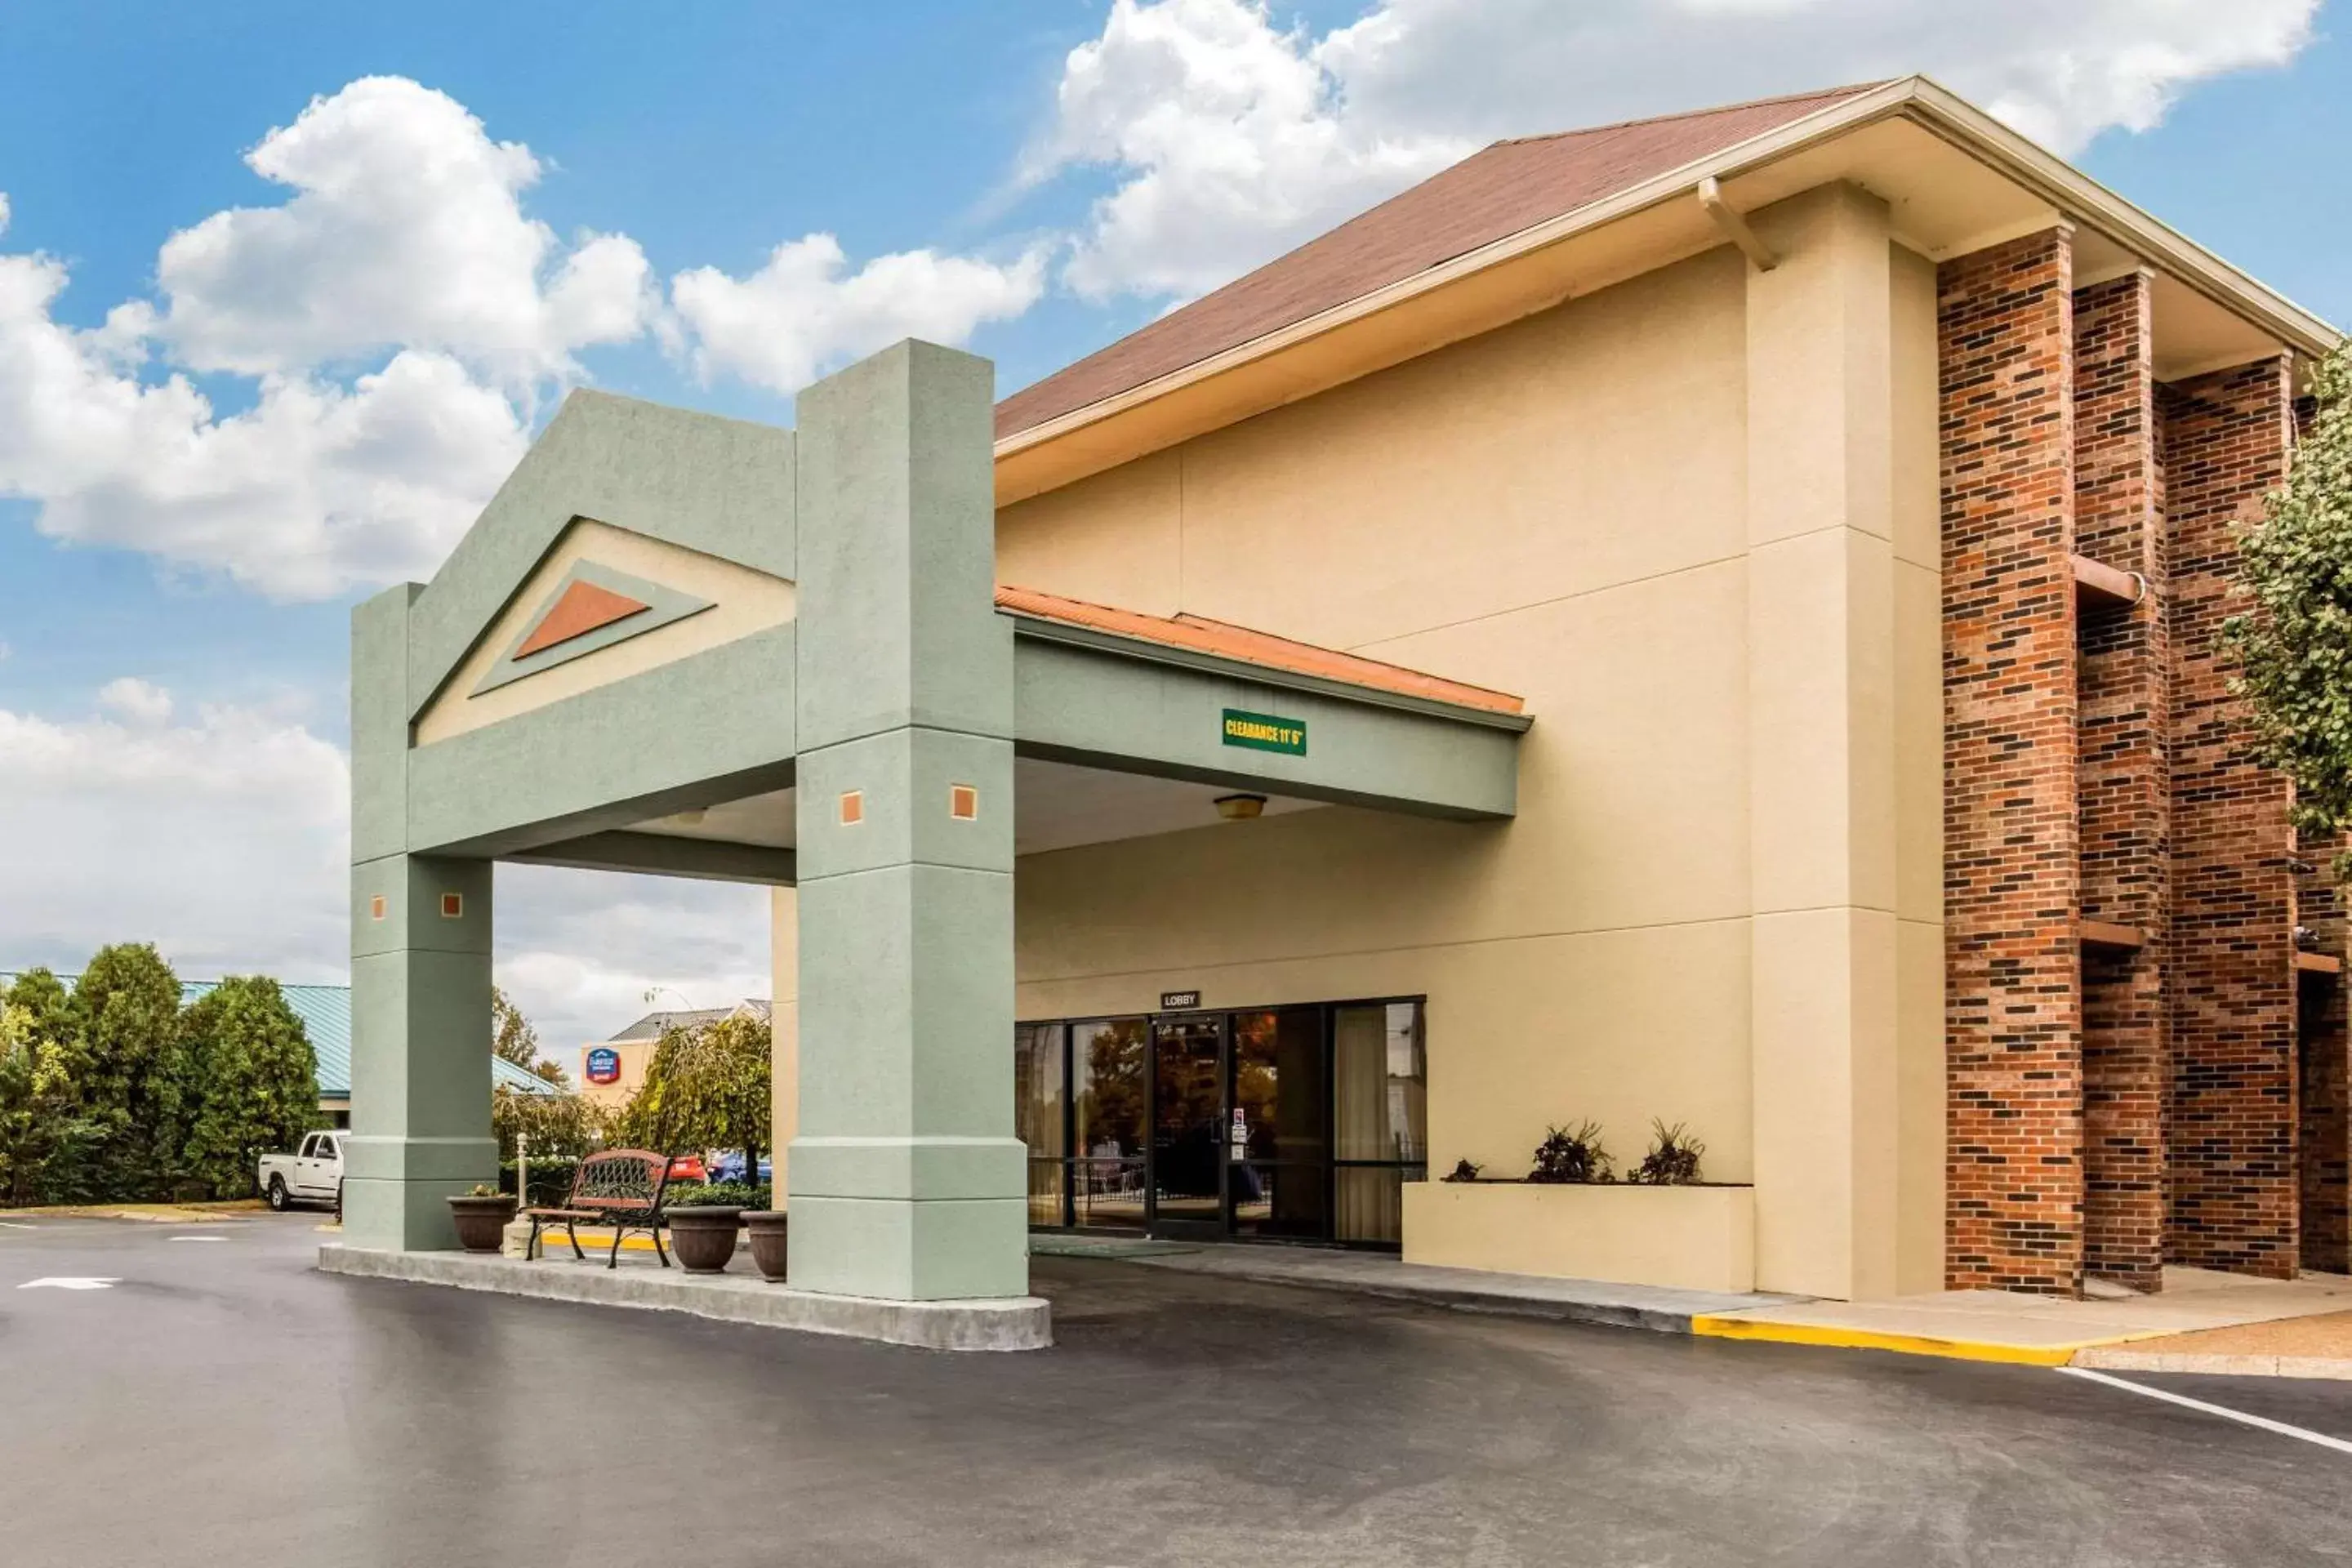 Property building in Quality Inn Opryland Area